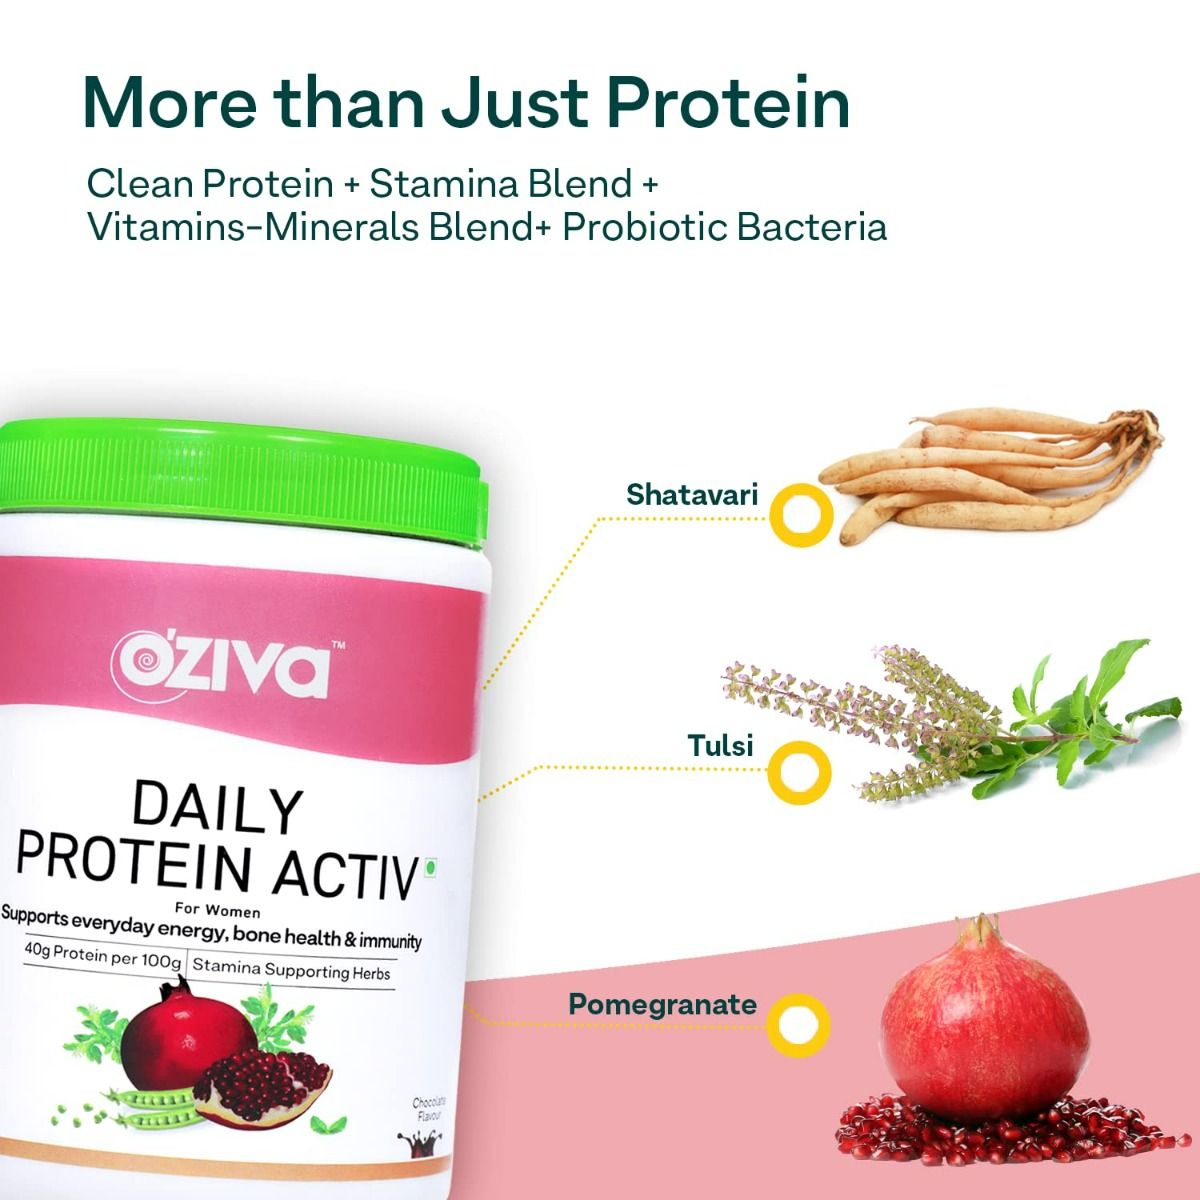 OZiva Daily Protein Activ Chocolate Flavour Powder for Women, 300 gm, Pack of 1 